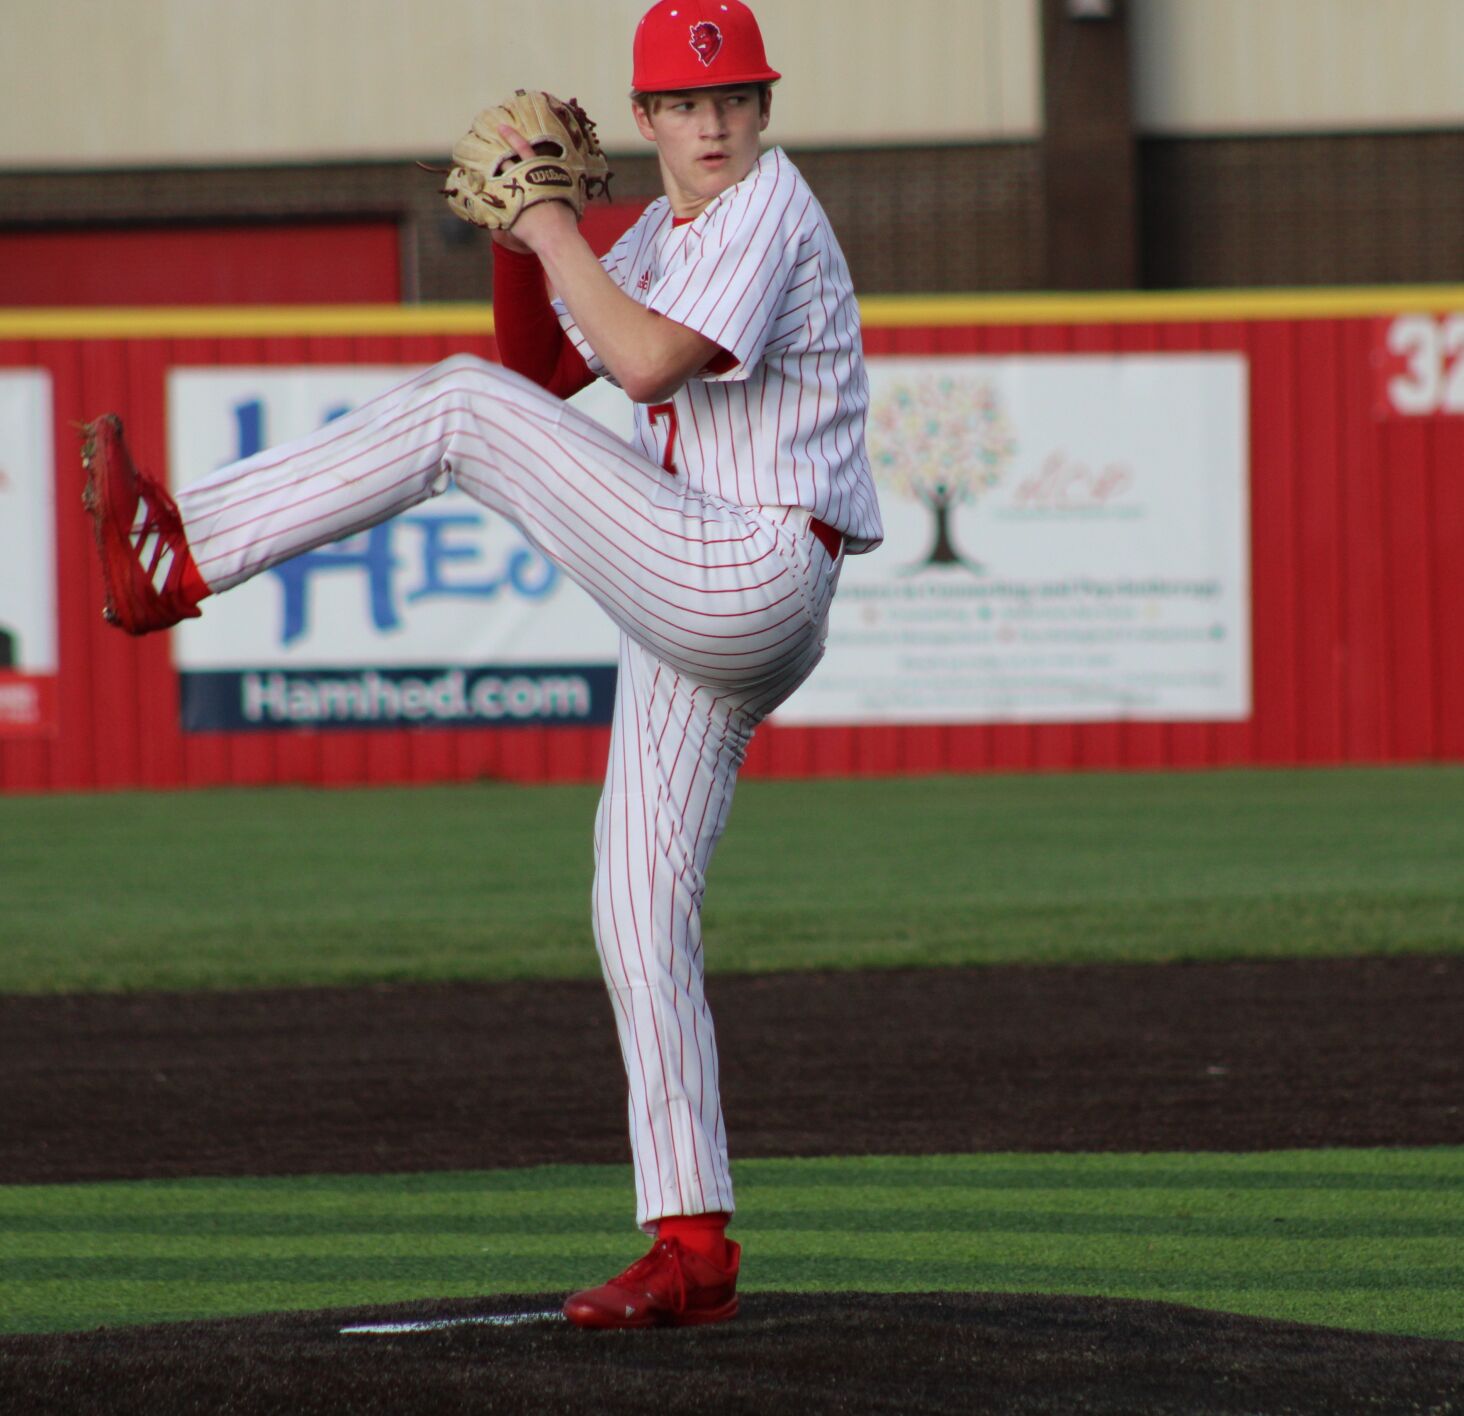 Jeffersonville vs. DuPont Manual: High School Baseball Home Opener Ends 4-3 with Dramatic Plays